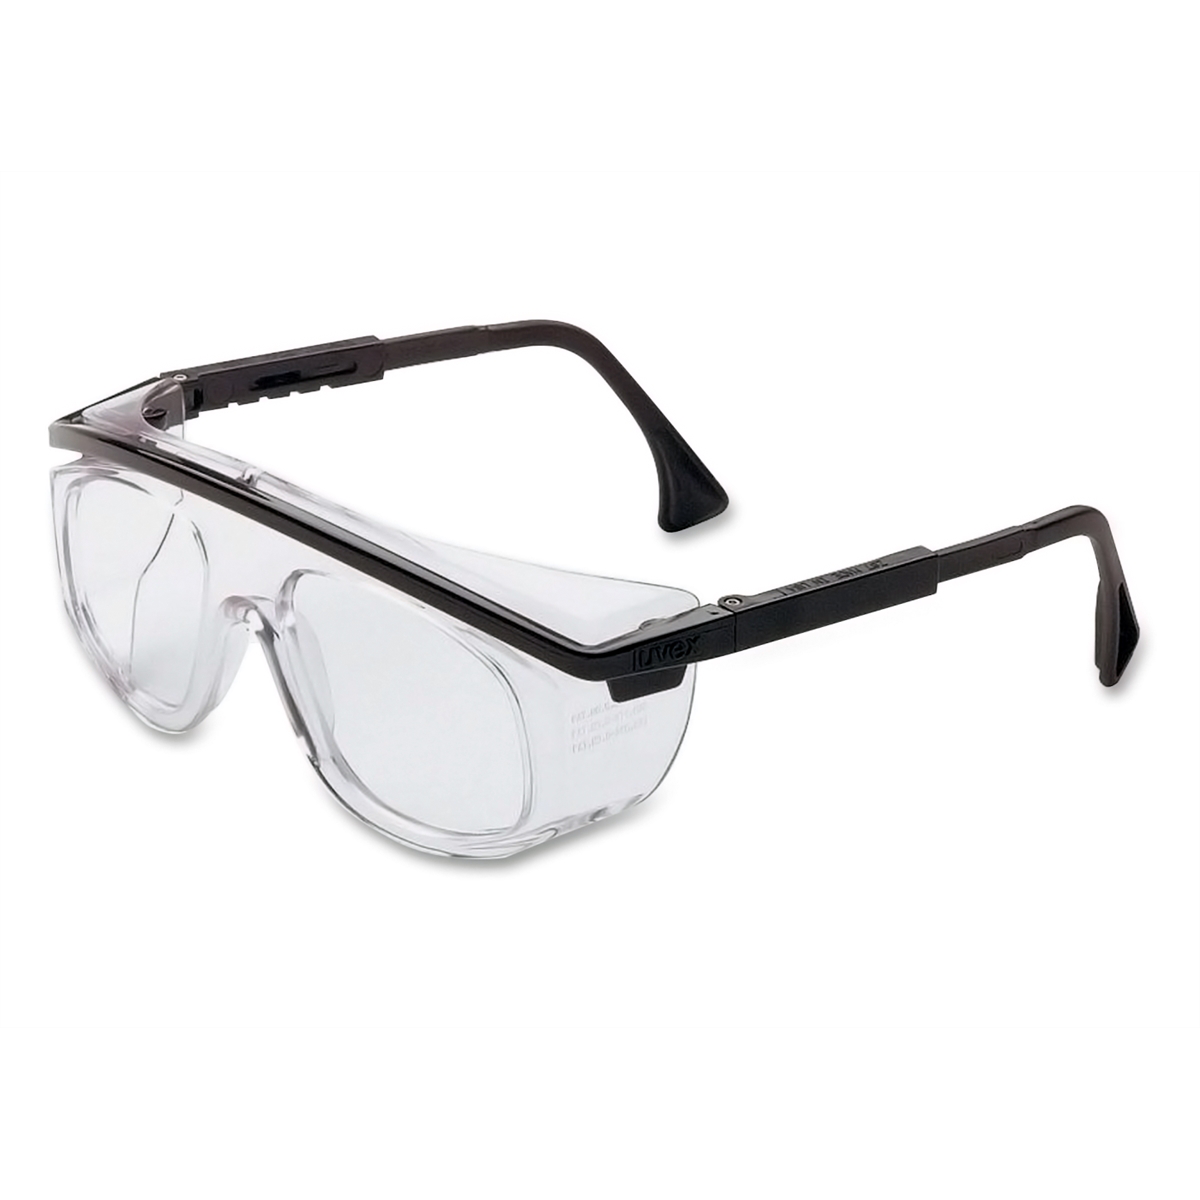 Safety Glasses - Over Glass - Astro OTG 3001 - Black/Clear